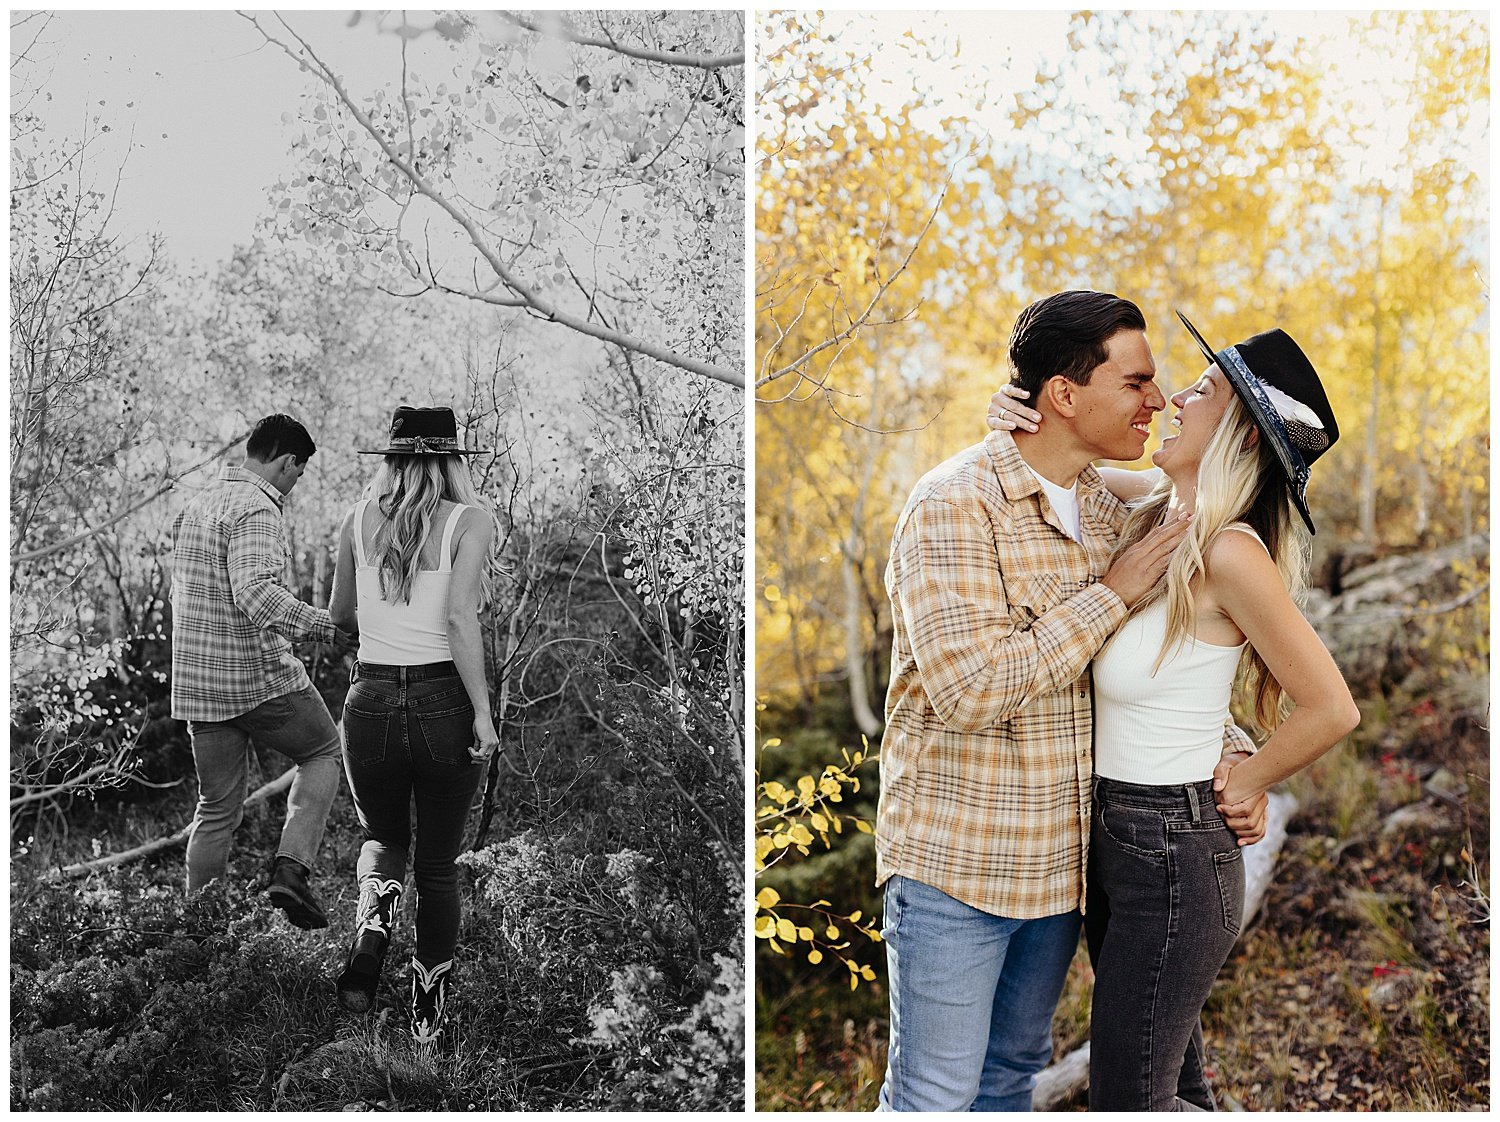 Fall engagement session in Aspen trees